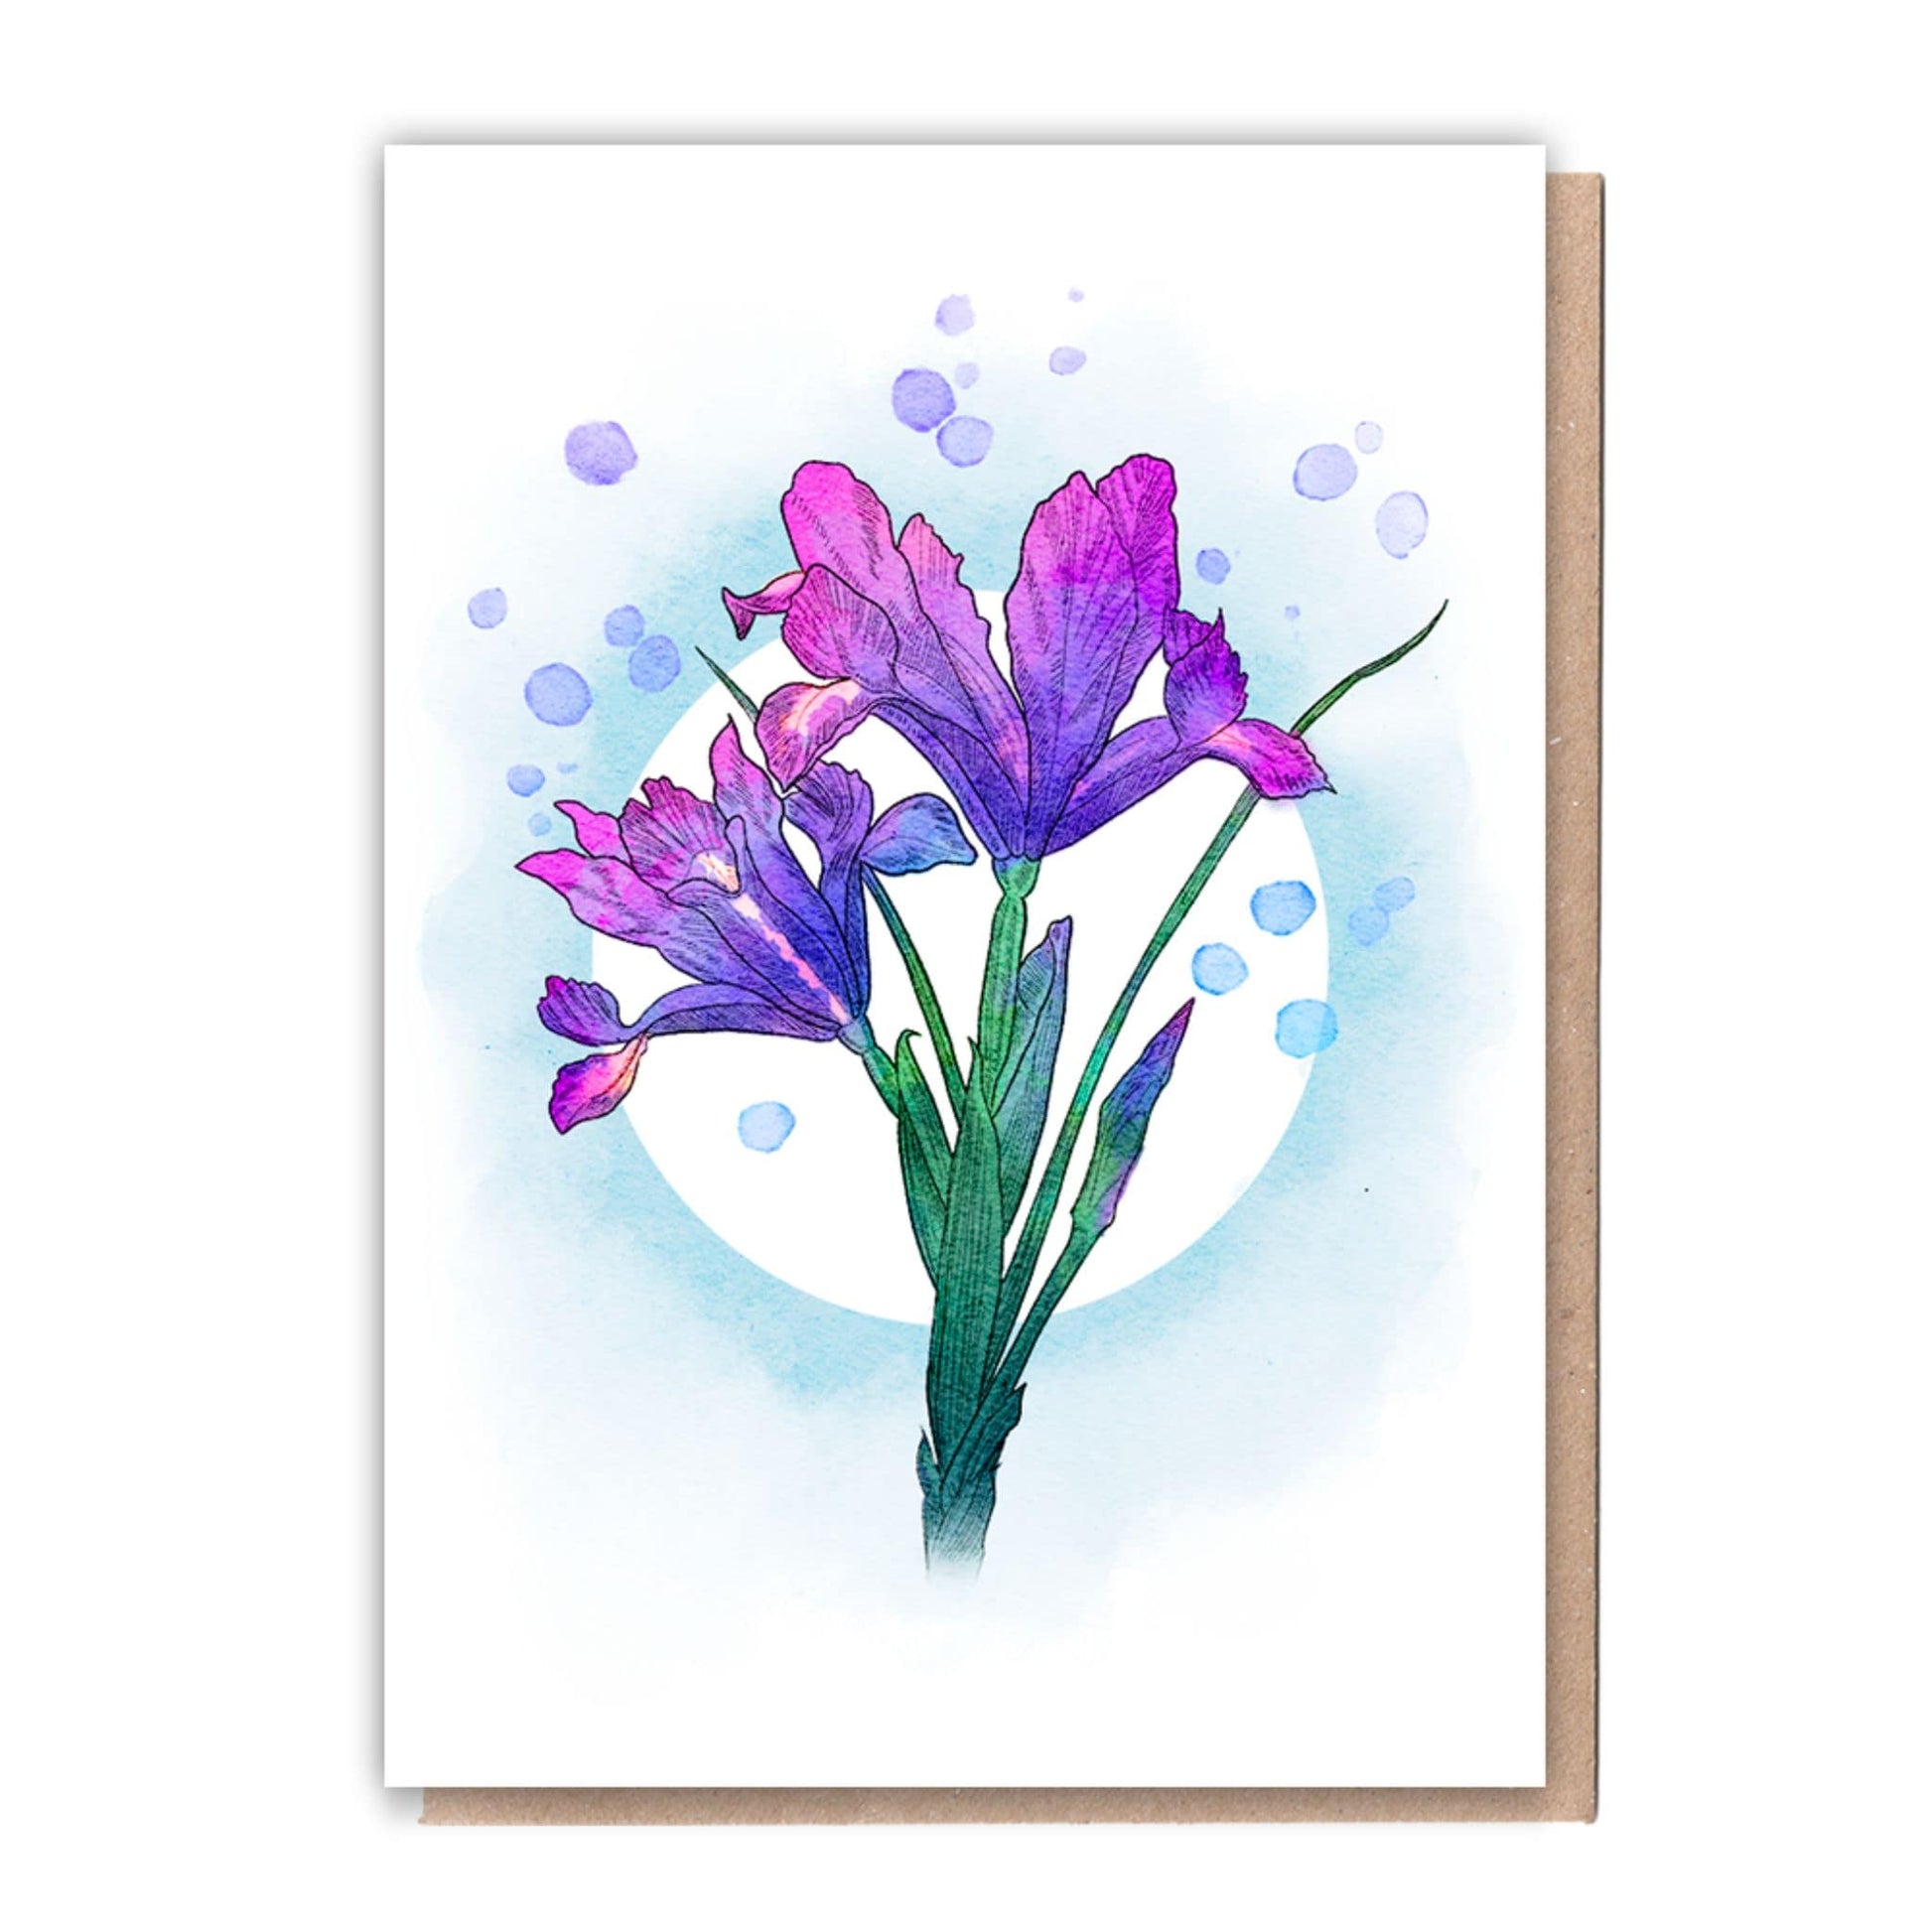 Recycled Greetings Card Box  5 Cards + 10 Trees Planted  Nature Lover - irises